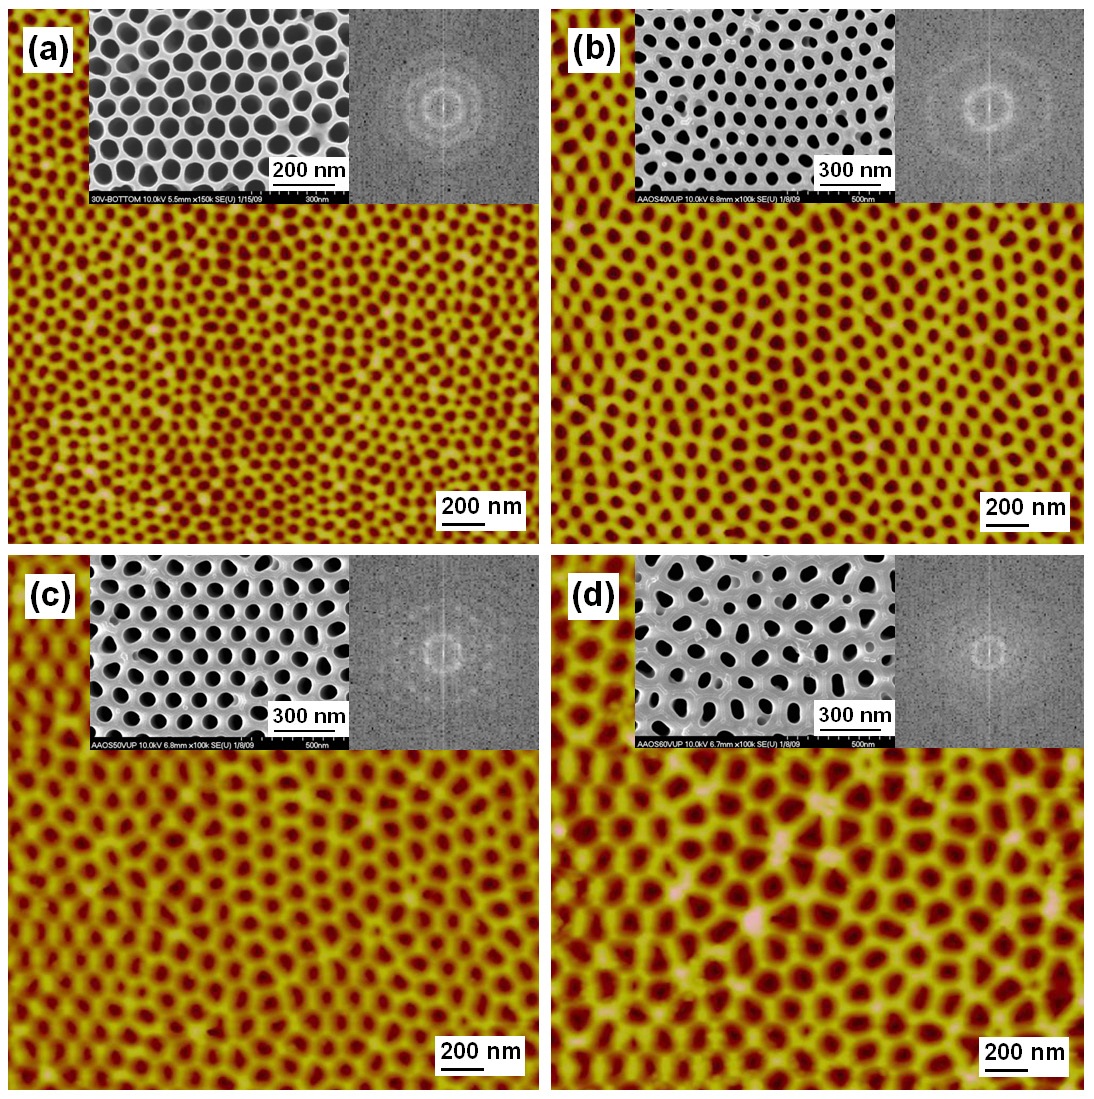 AFM and SEM images for various bias voltages of 30, 40, 50,and 60 V. The insets are the patterns from the fast Fourier transformanalysis.